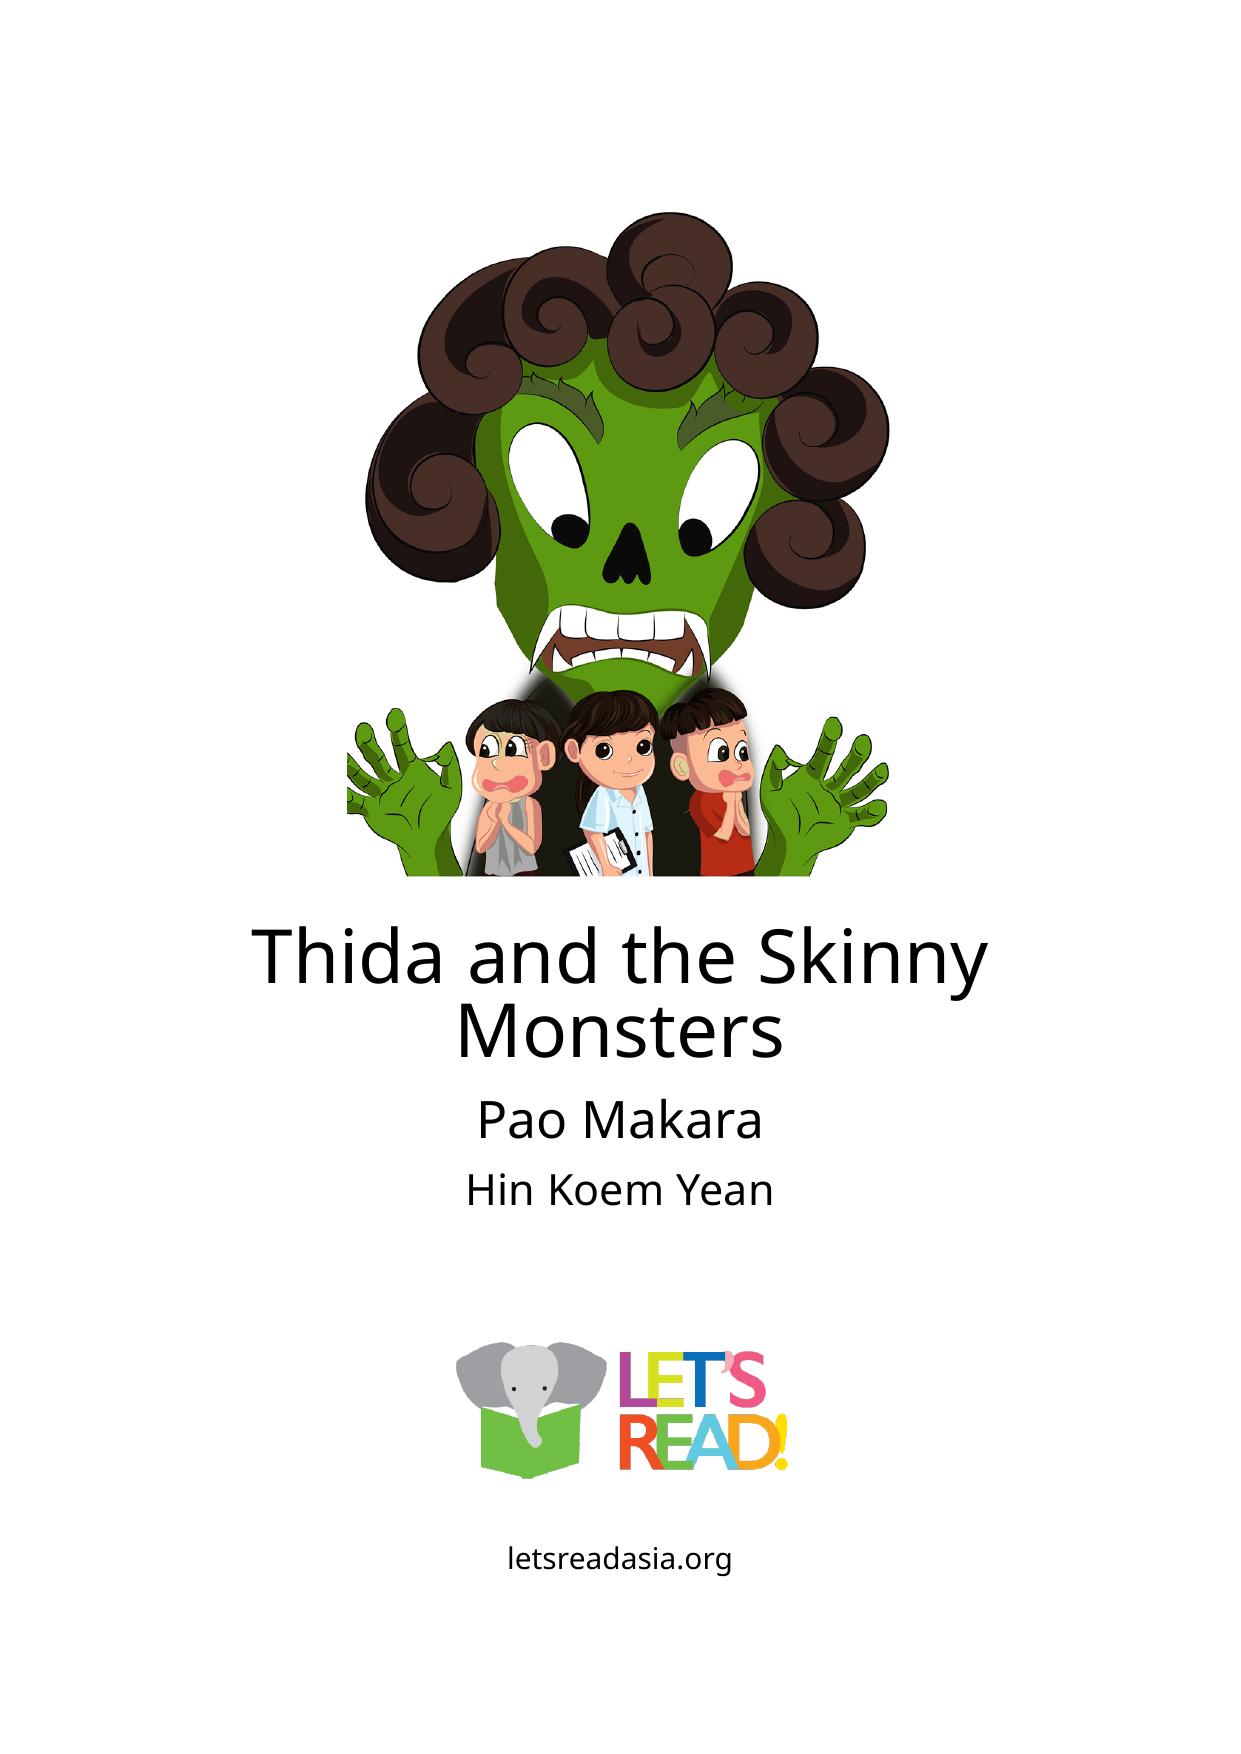 ​Thida and the Skinny Monsters